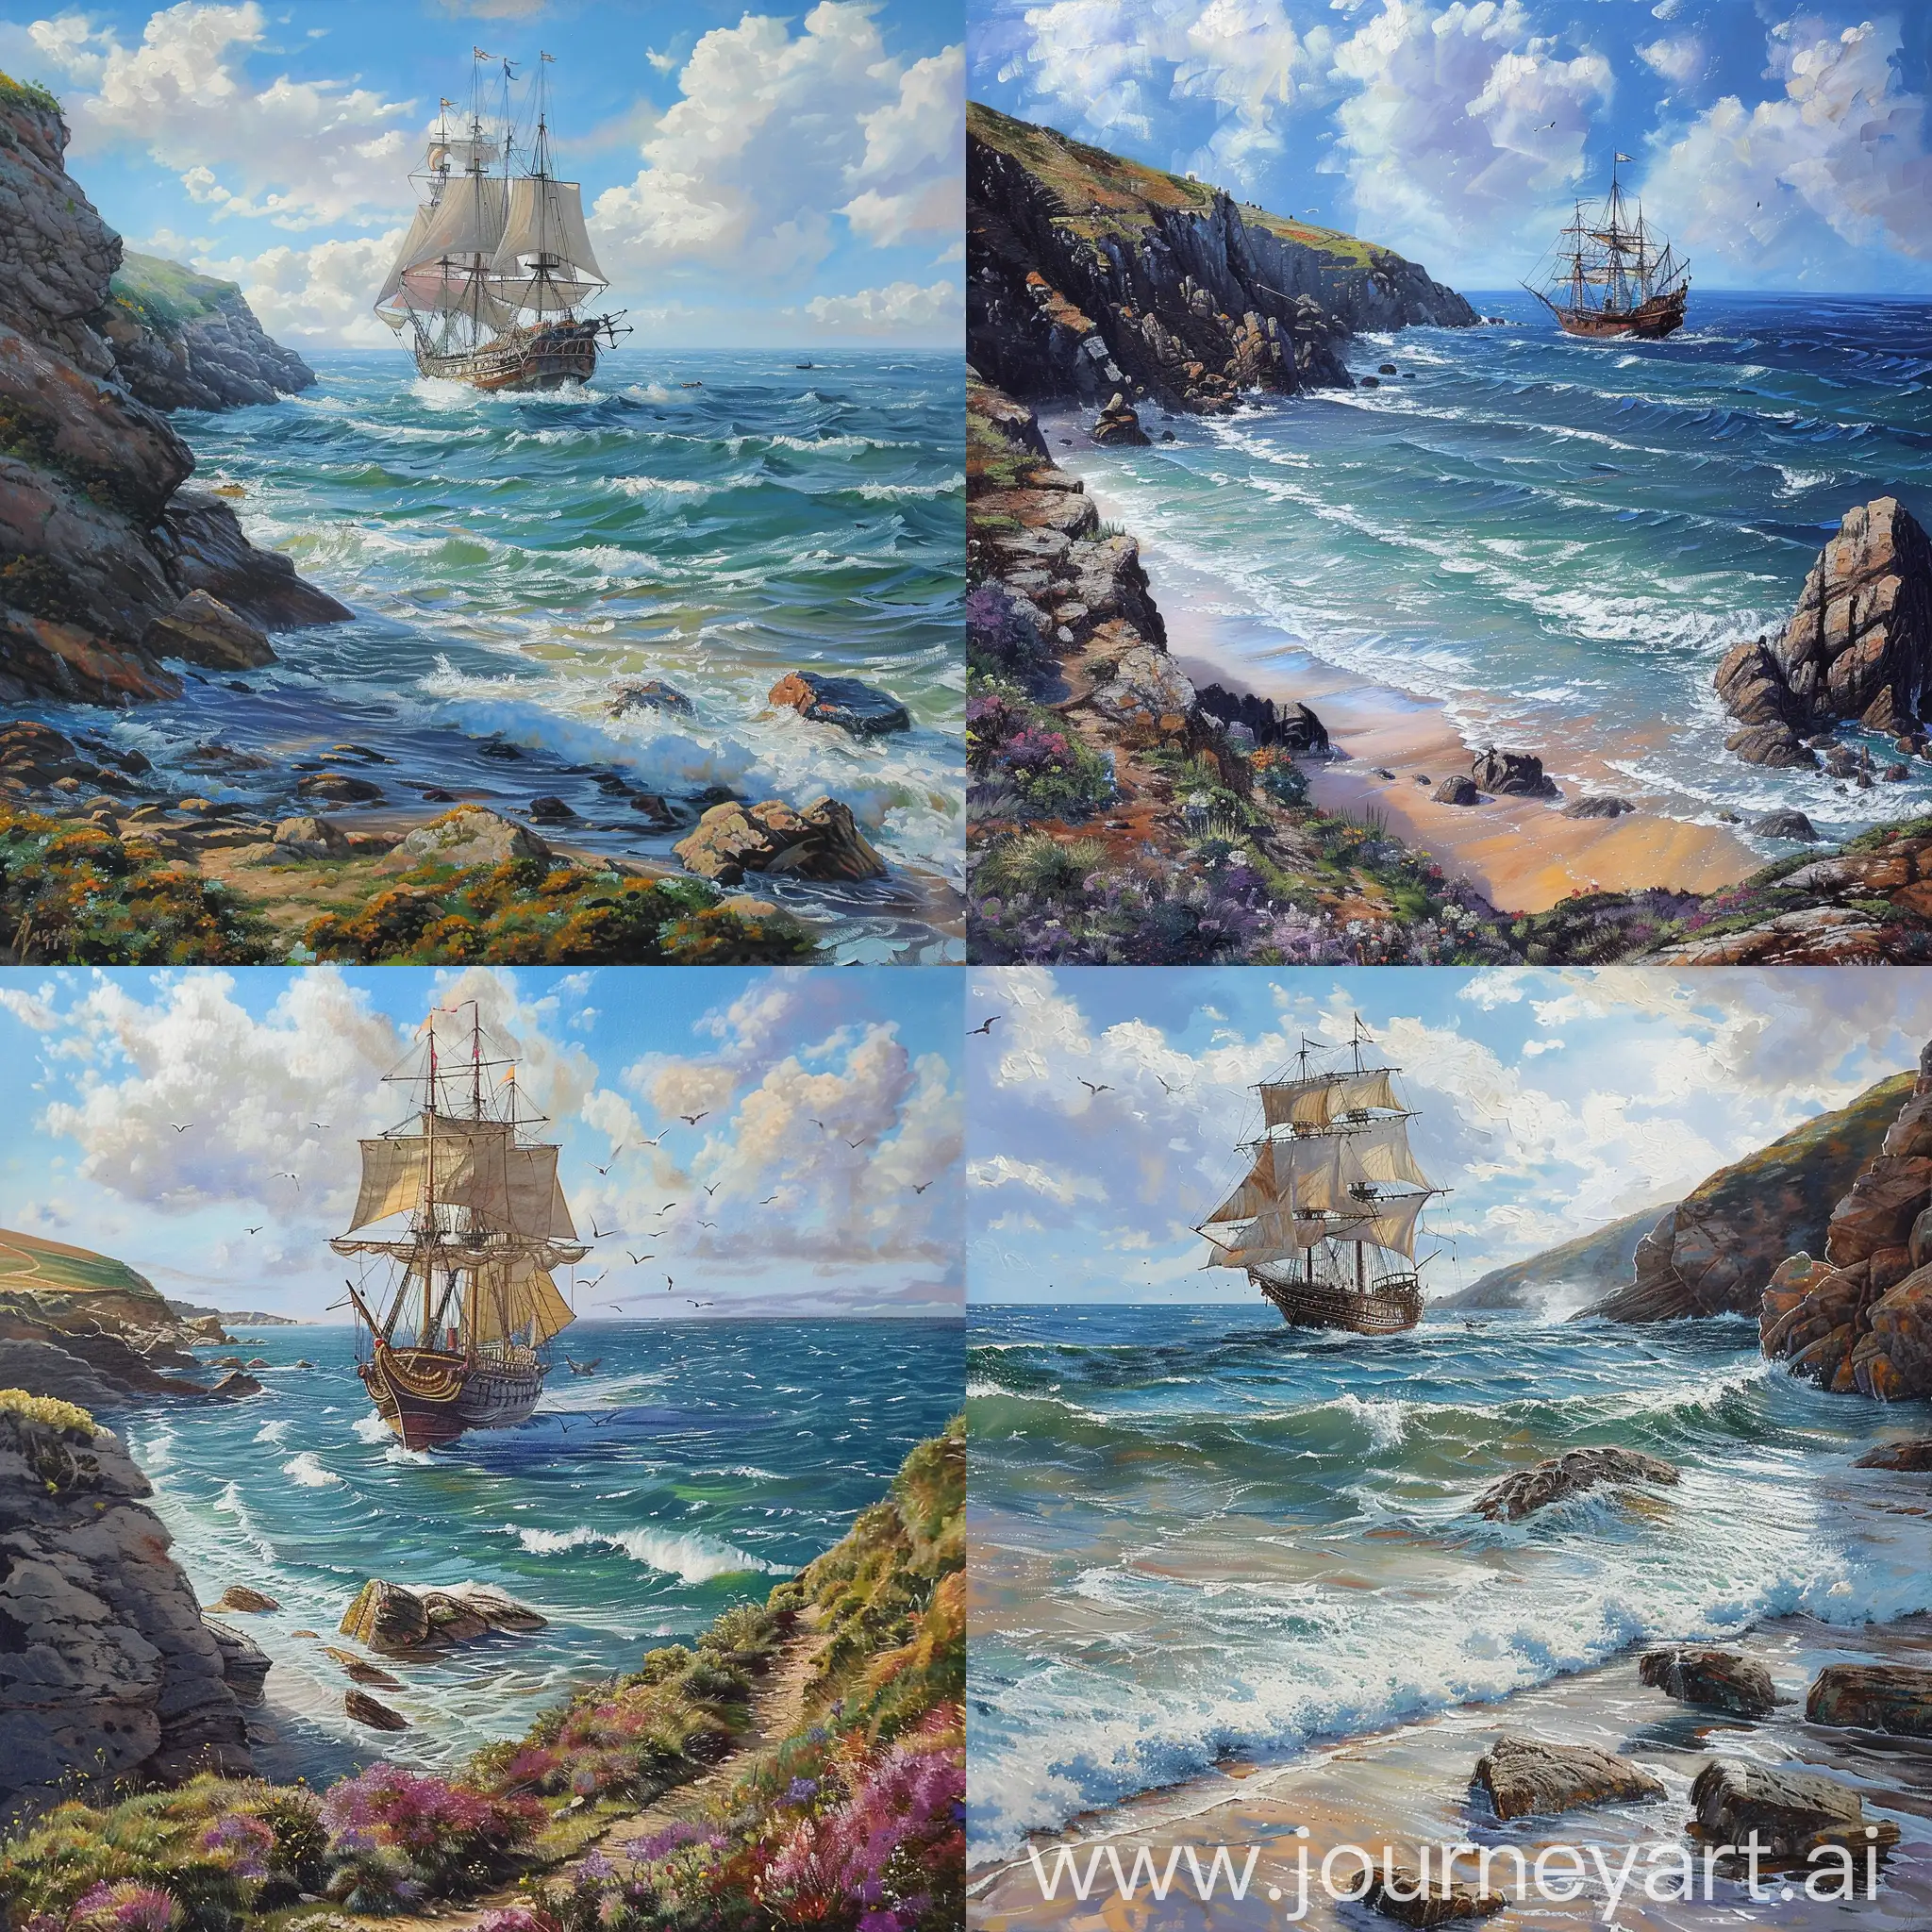 /imagine an oil painting of a galleon on the sea off the coast of cornwall, on a sunny day